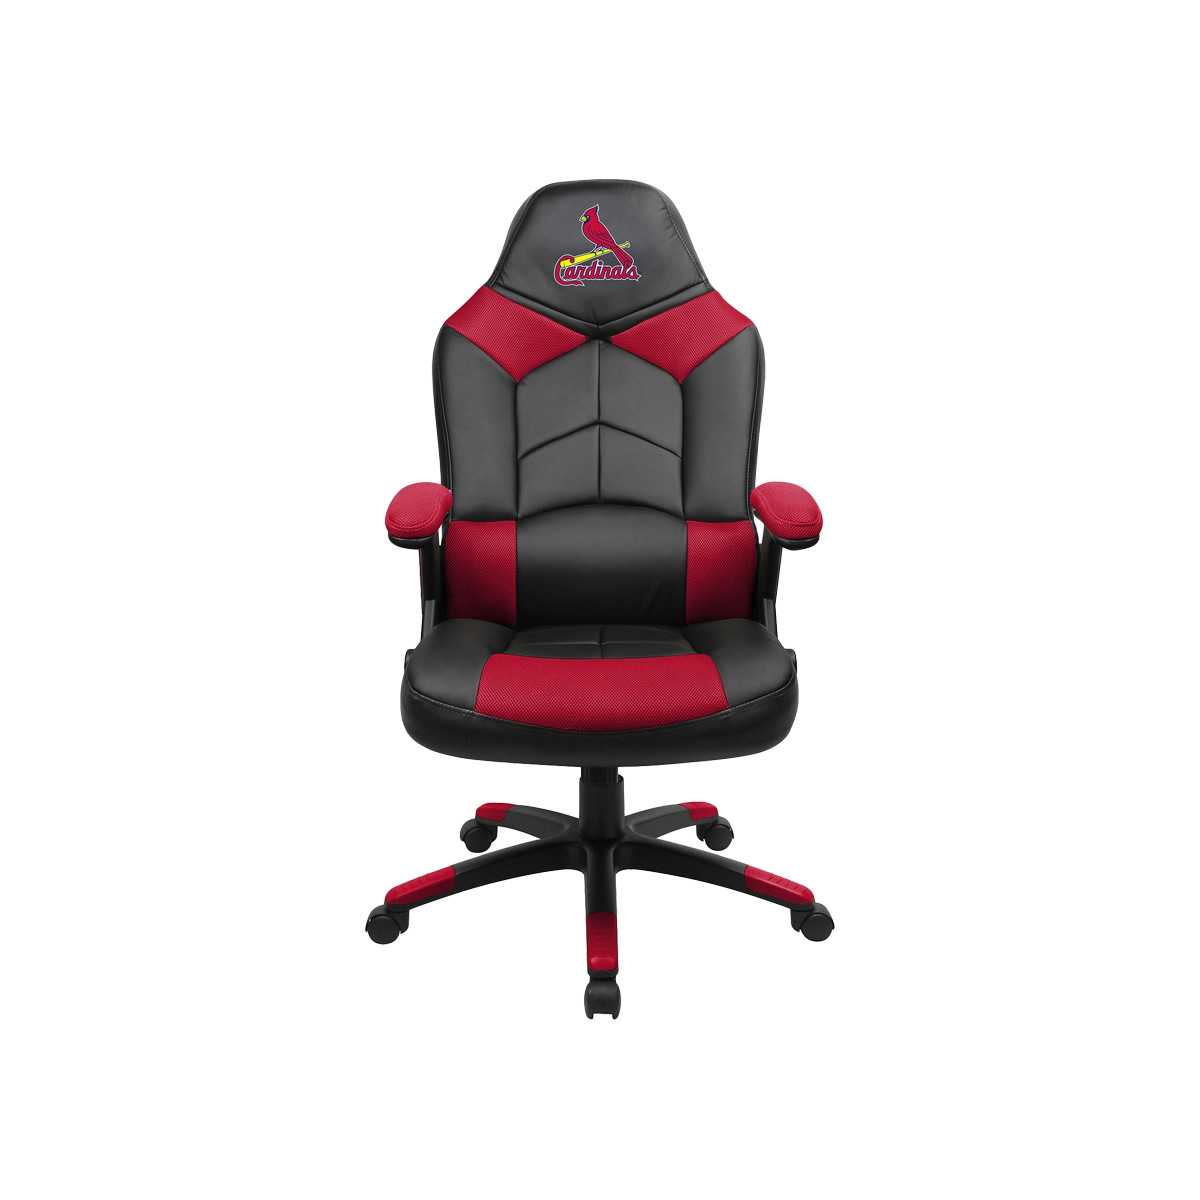 STL CARDINALS OVERSIZED GAMING CHAIR